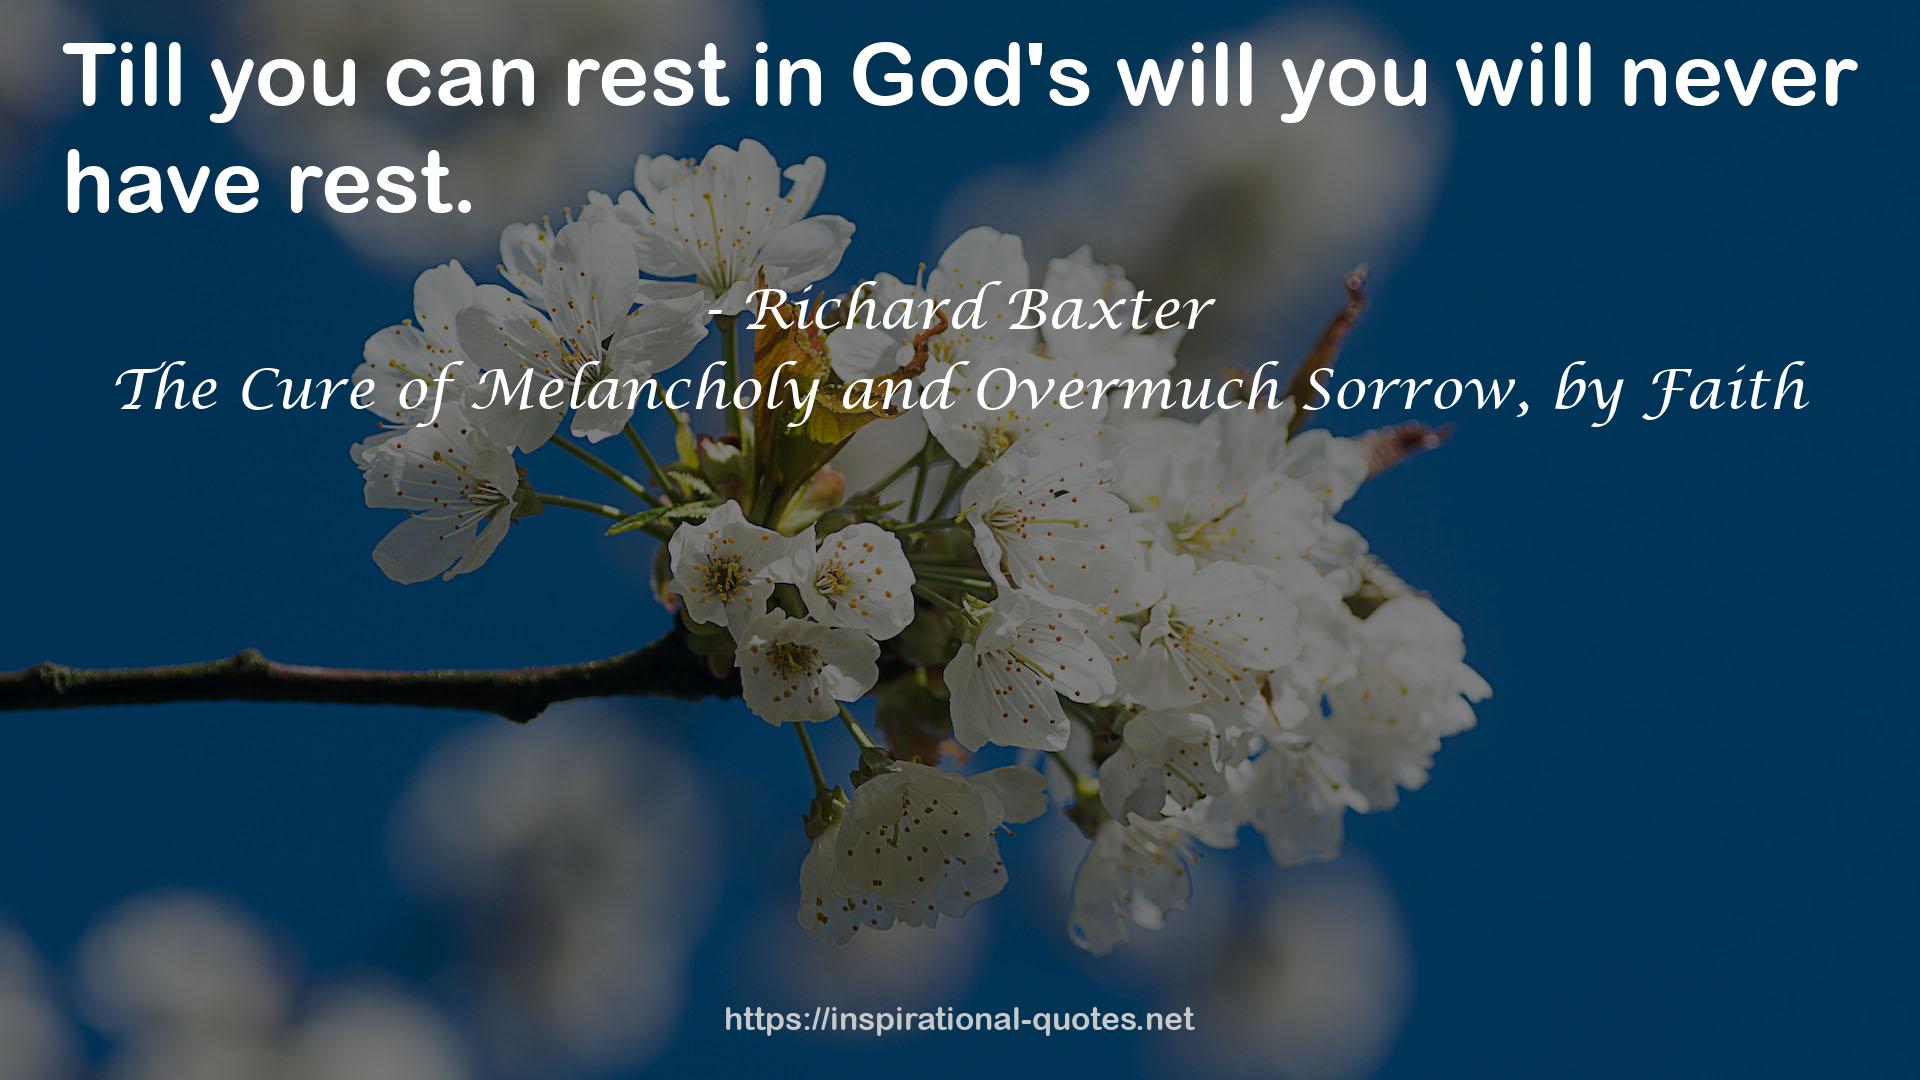 The Cure of Melancholy and Overmuch Sorrow, by Faith QUOTES